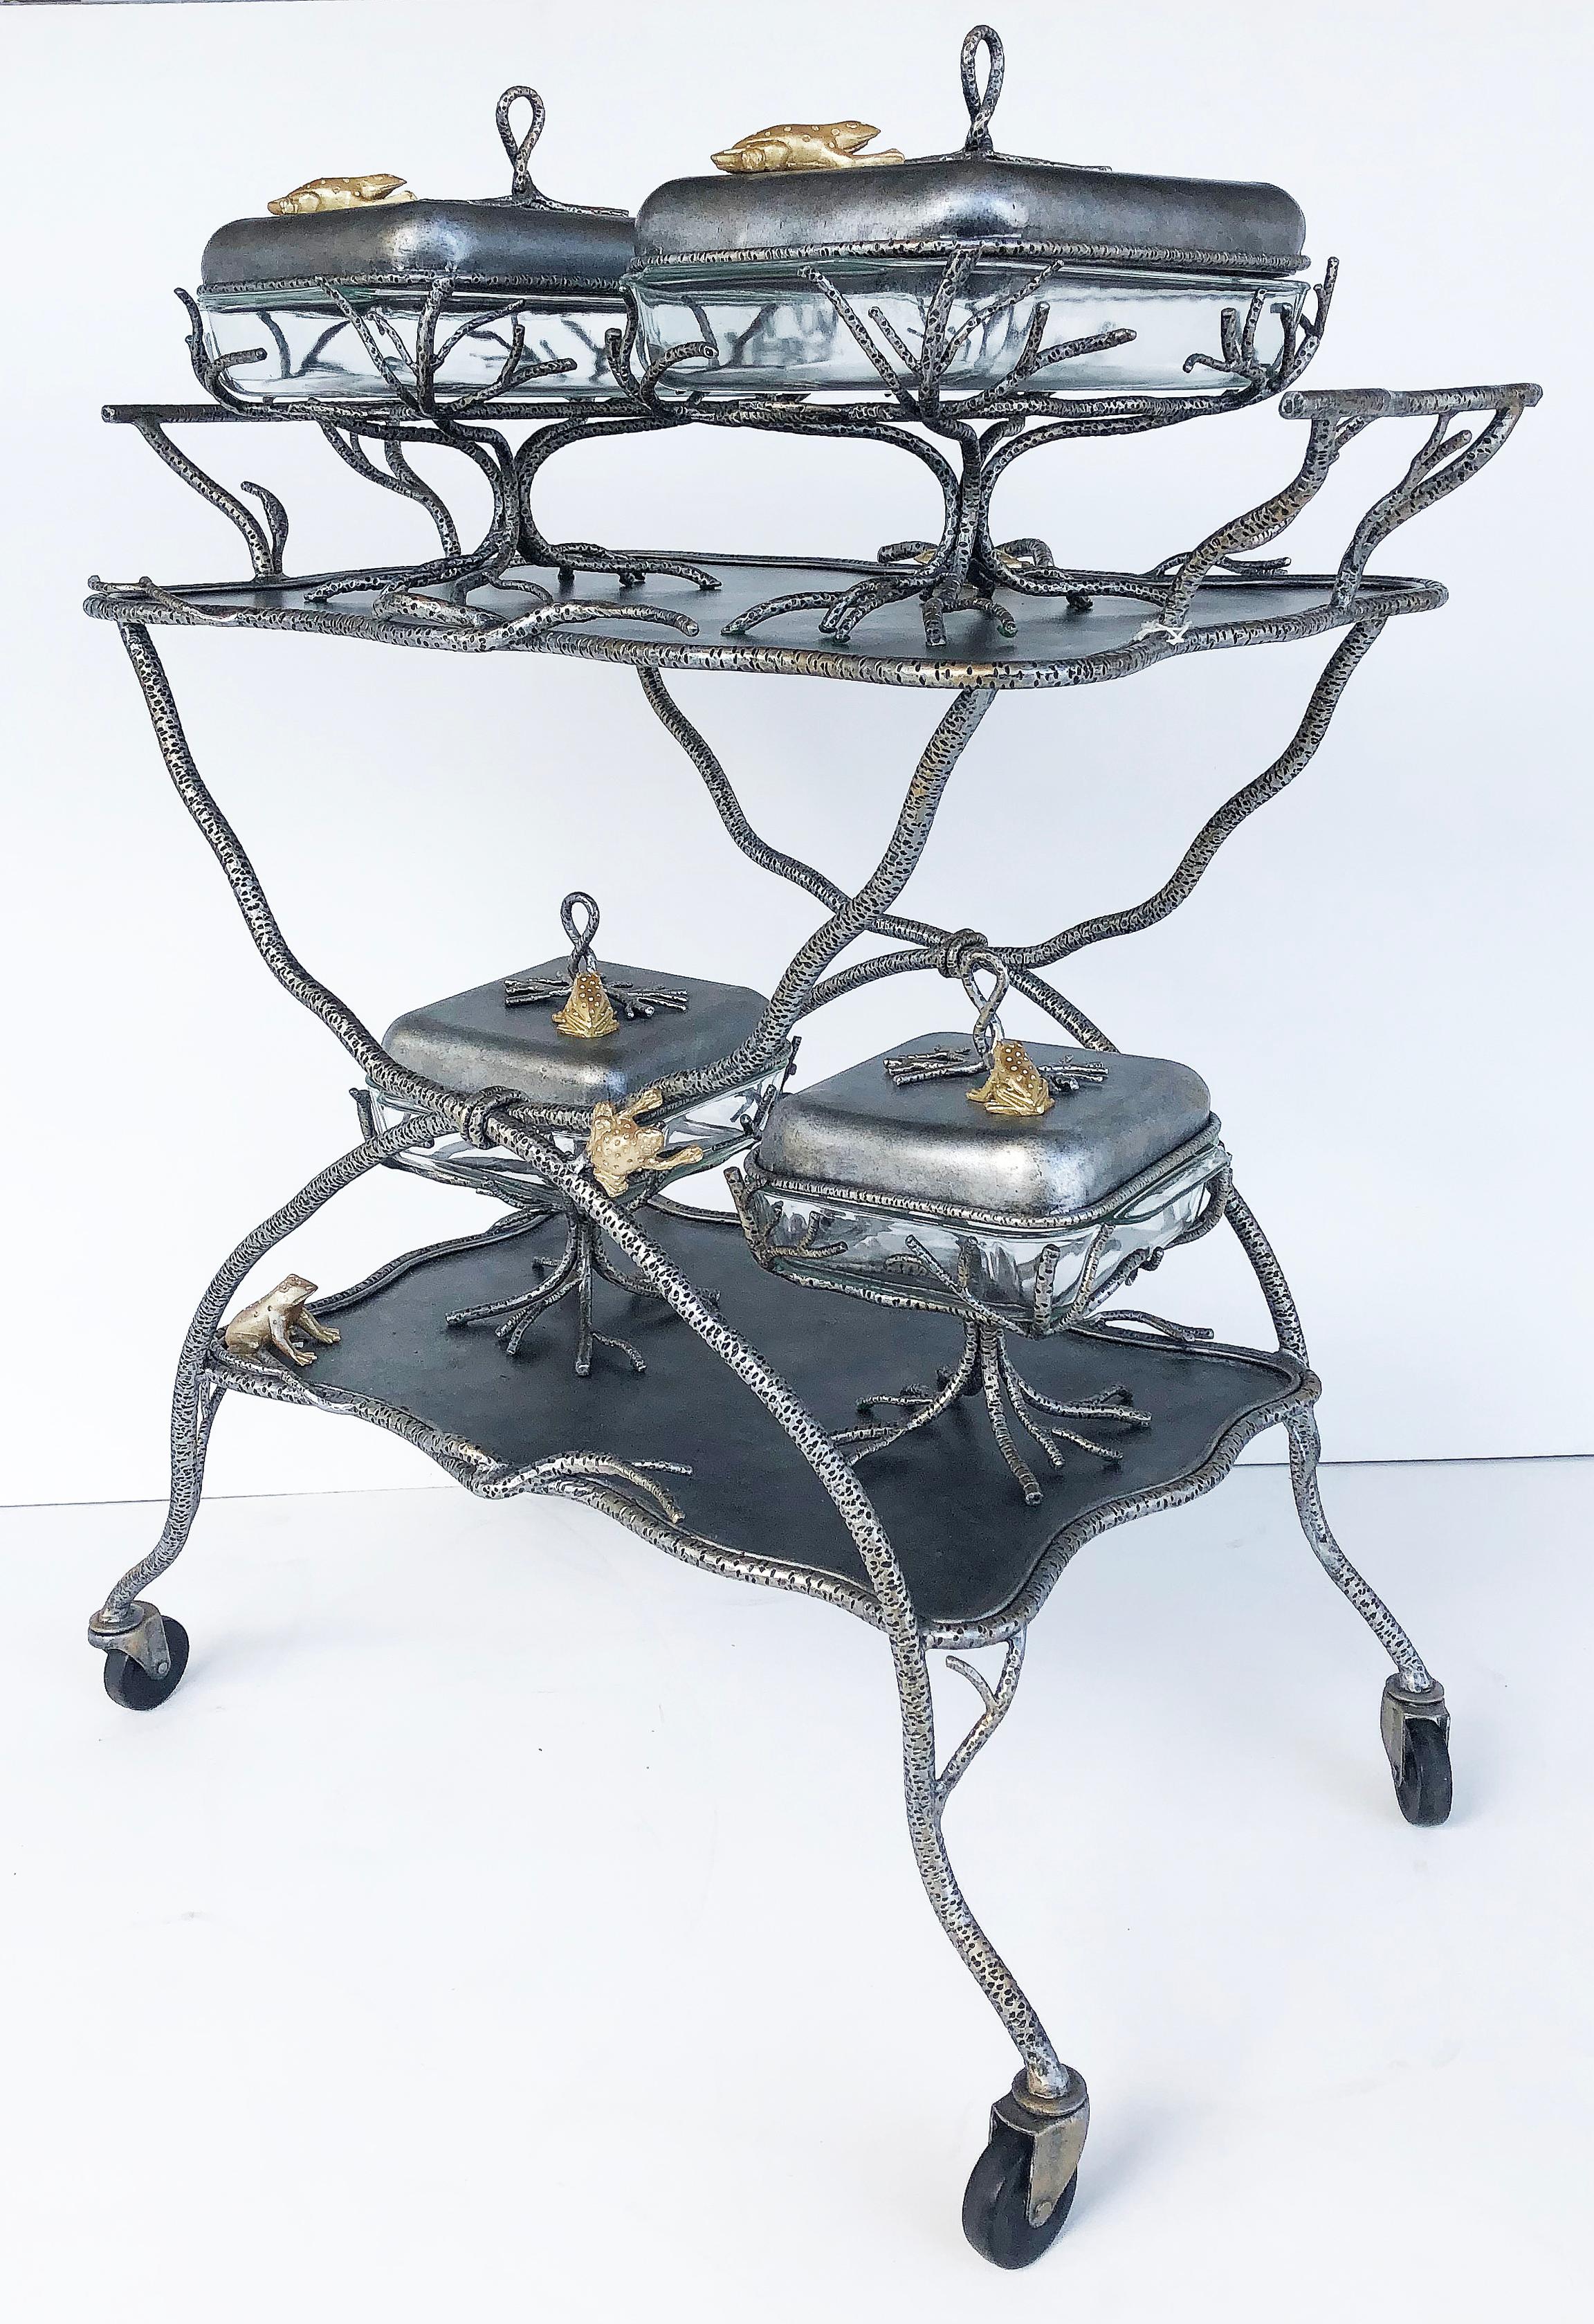 Fantasy Studio pewter serving cart with frog covered serving dishes set.

Offered for sale is a pewter two-tiered serving cart in the form of branches embellished with gilt frogs. This is probably a one-off studio fantasy piece with a Brutalist